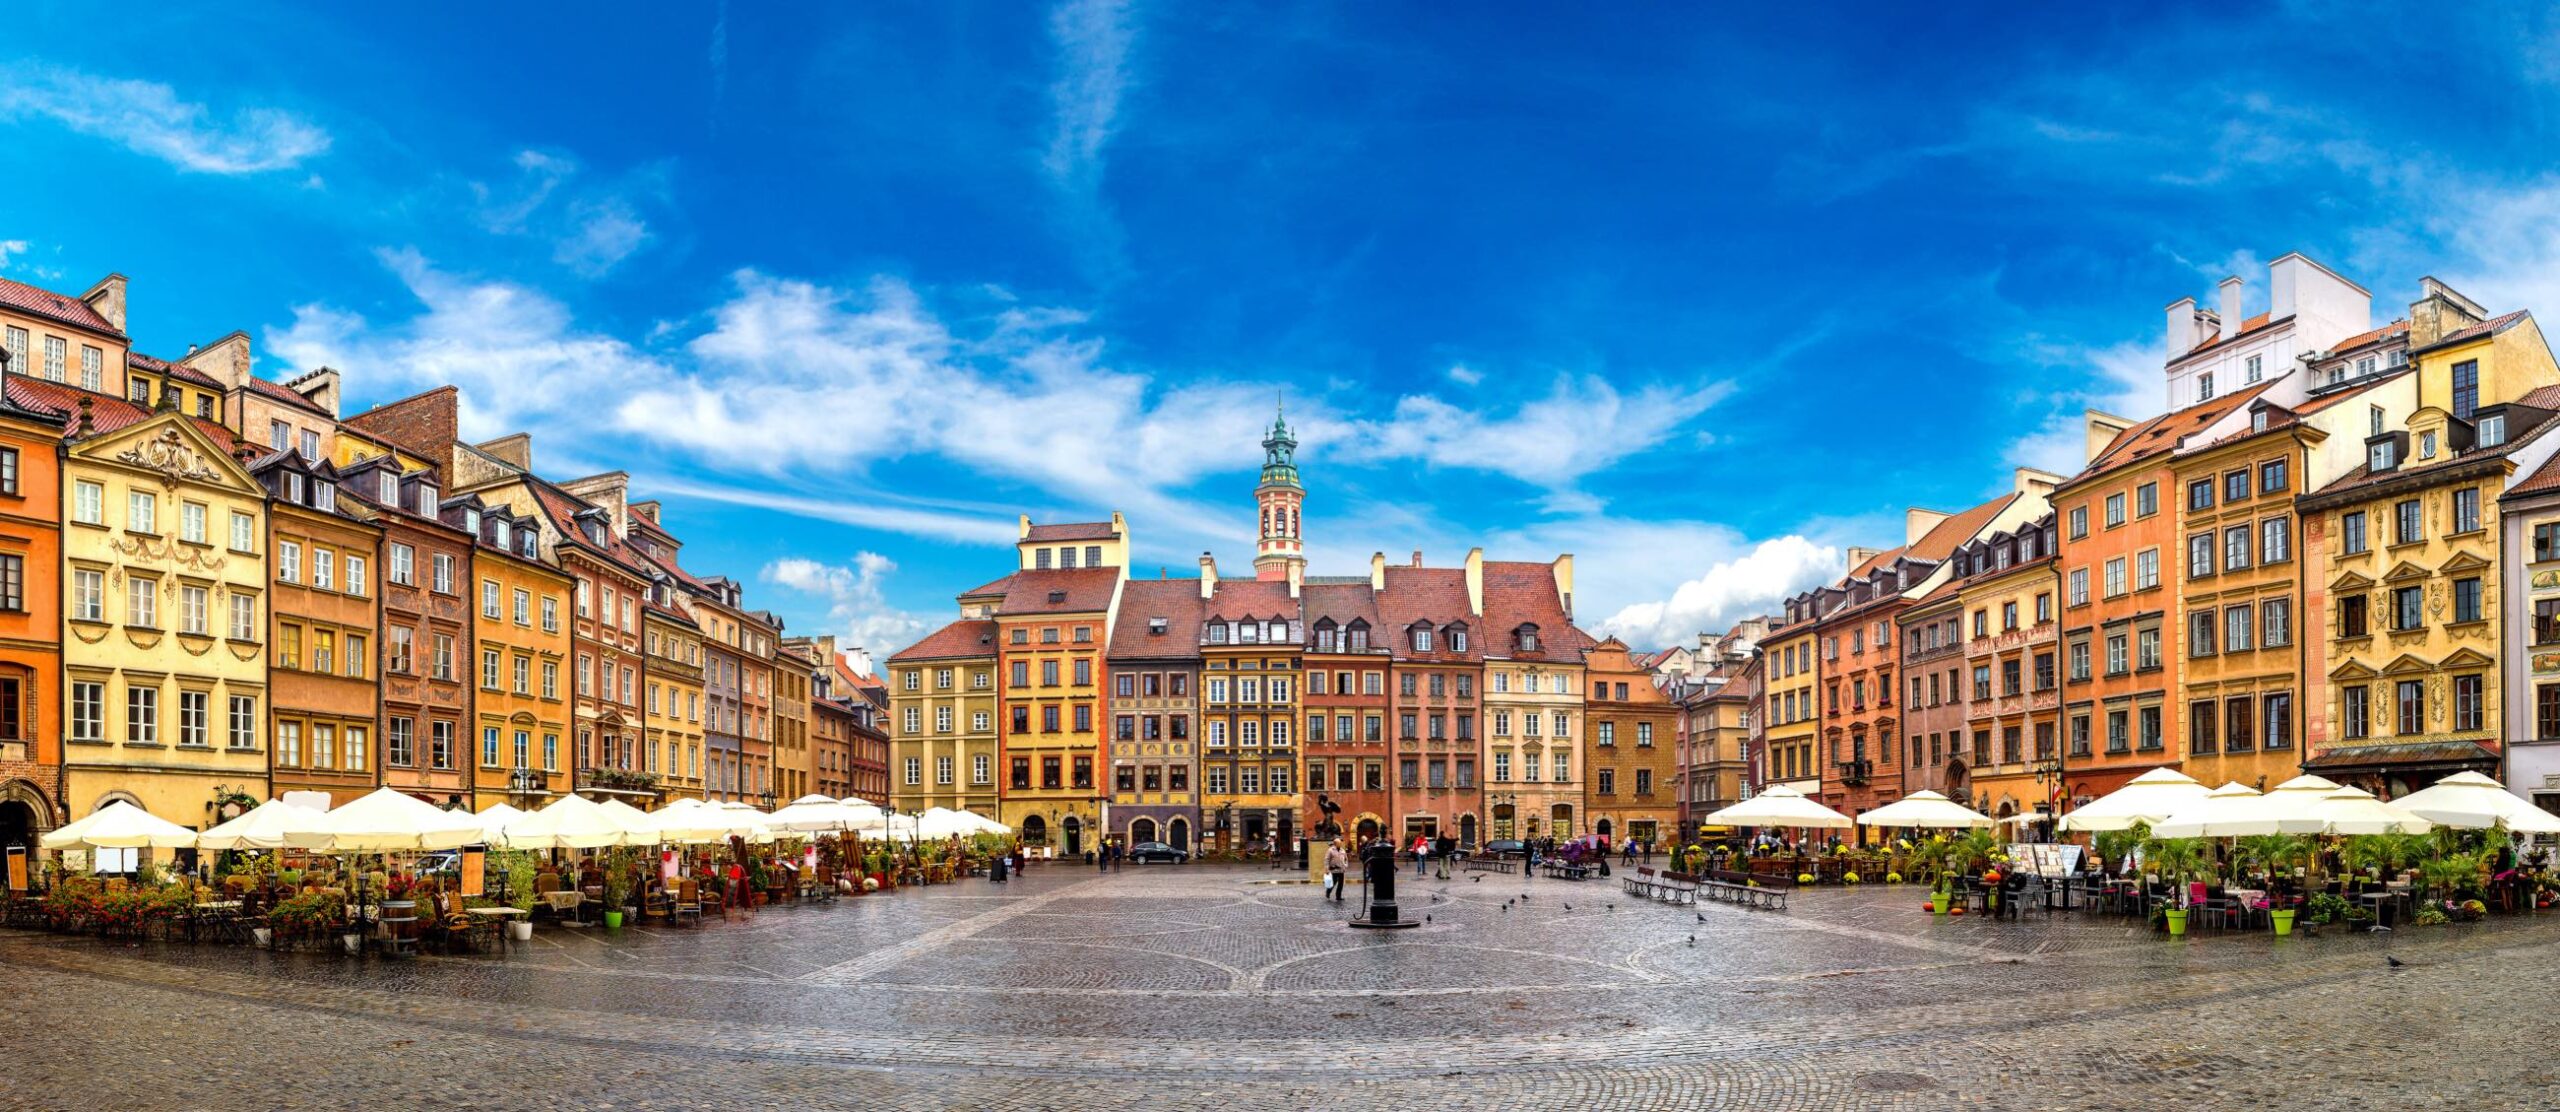 Warsaw: Poland’s Hip Capital – Top Places to Visit During Your Stay